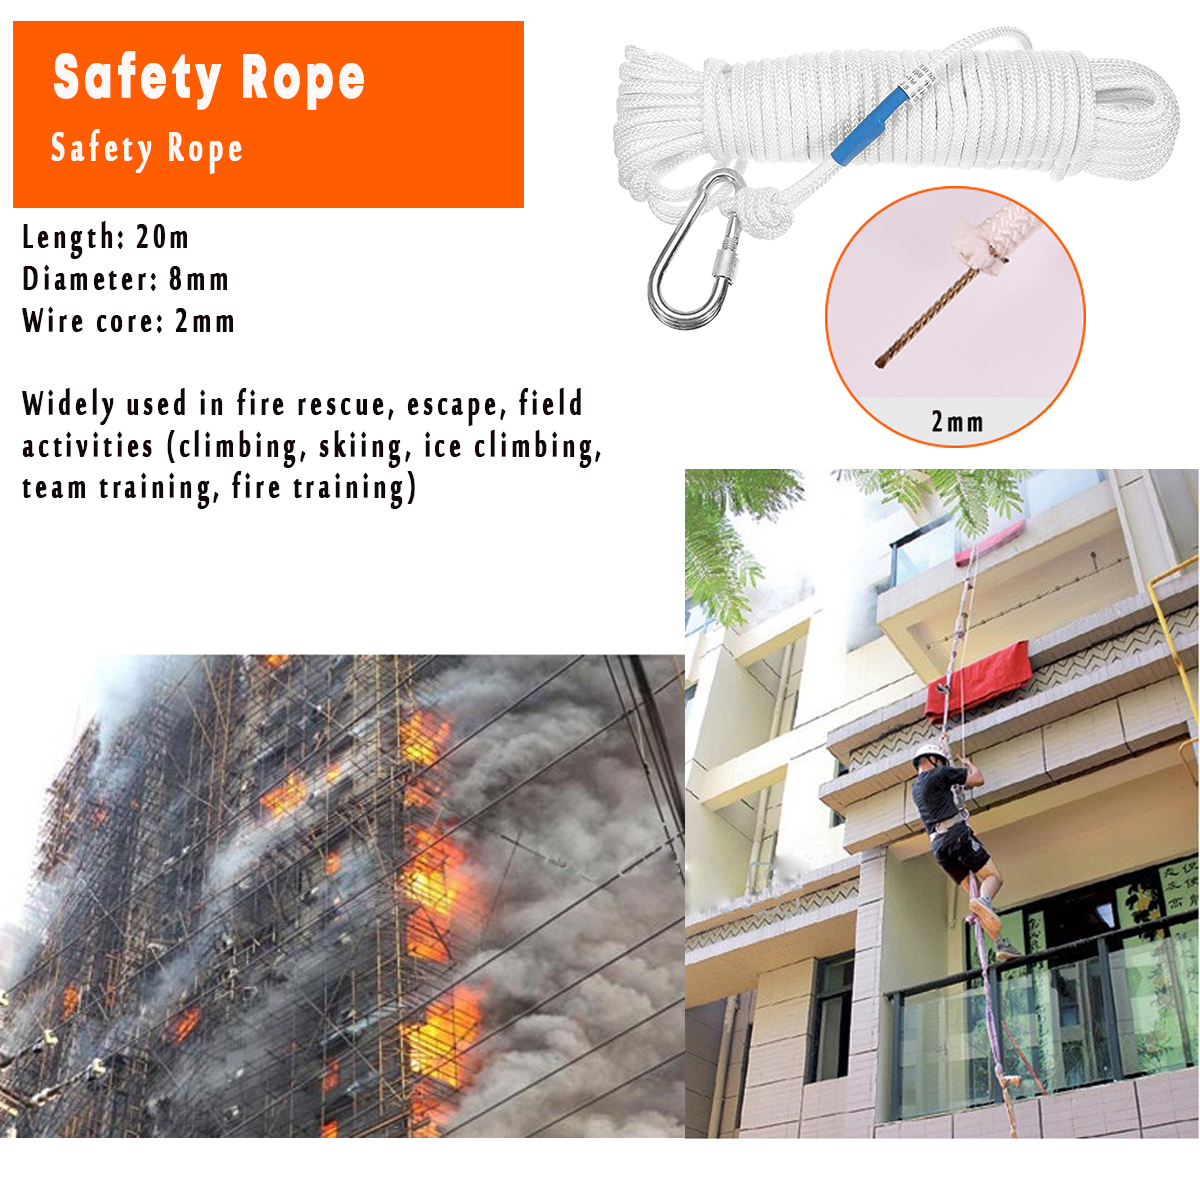 Fire-Emergency-Survival-Kits-Safety-Rope-Whistle-Home-Spare-Fire-Escape-Package-Outdoor-Rescue-Tools-1545533-2